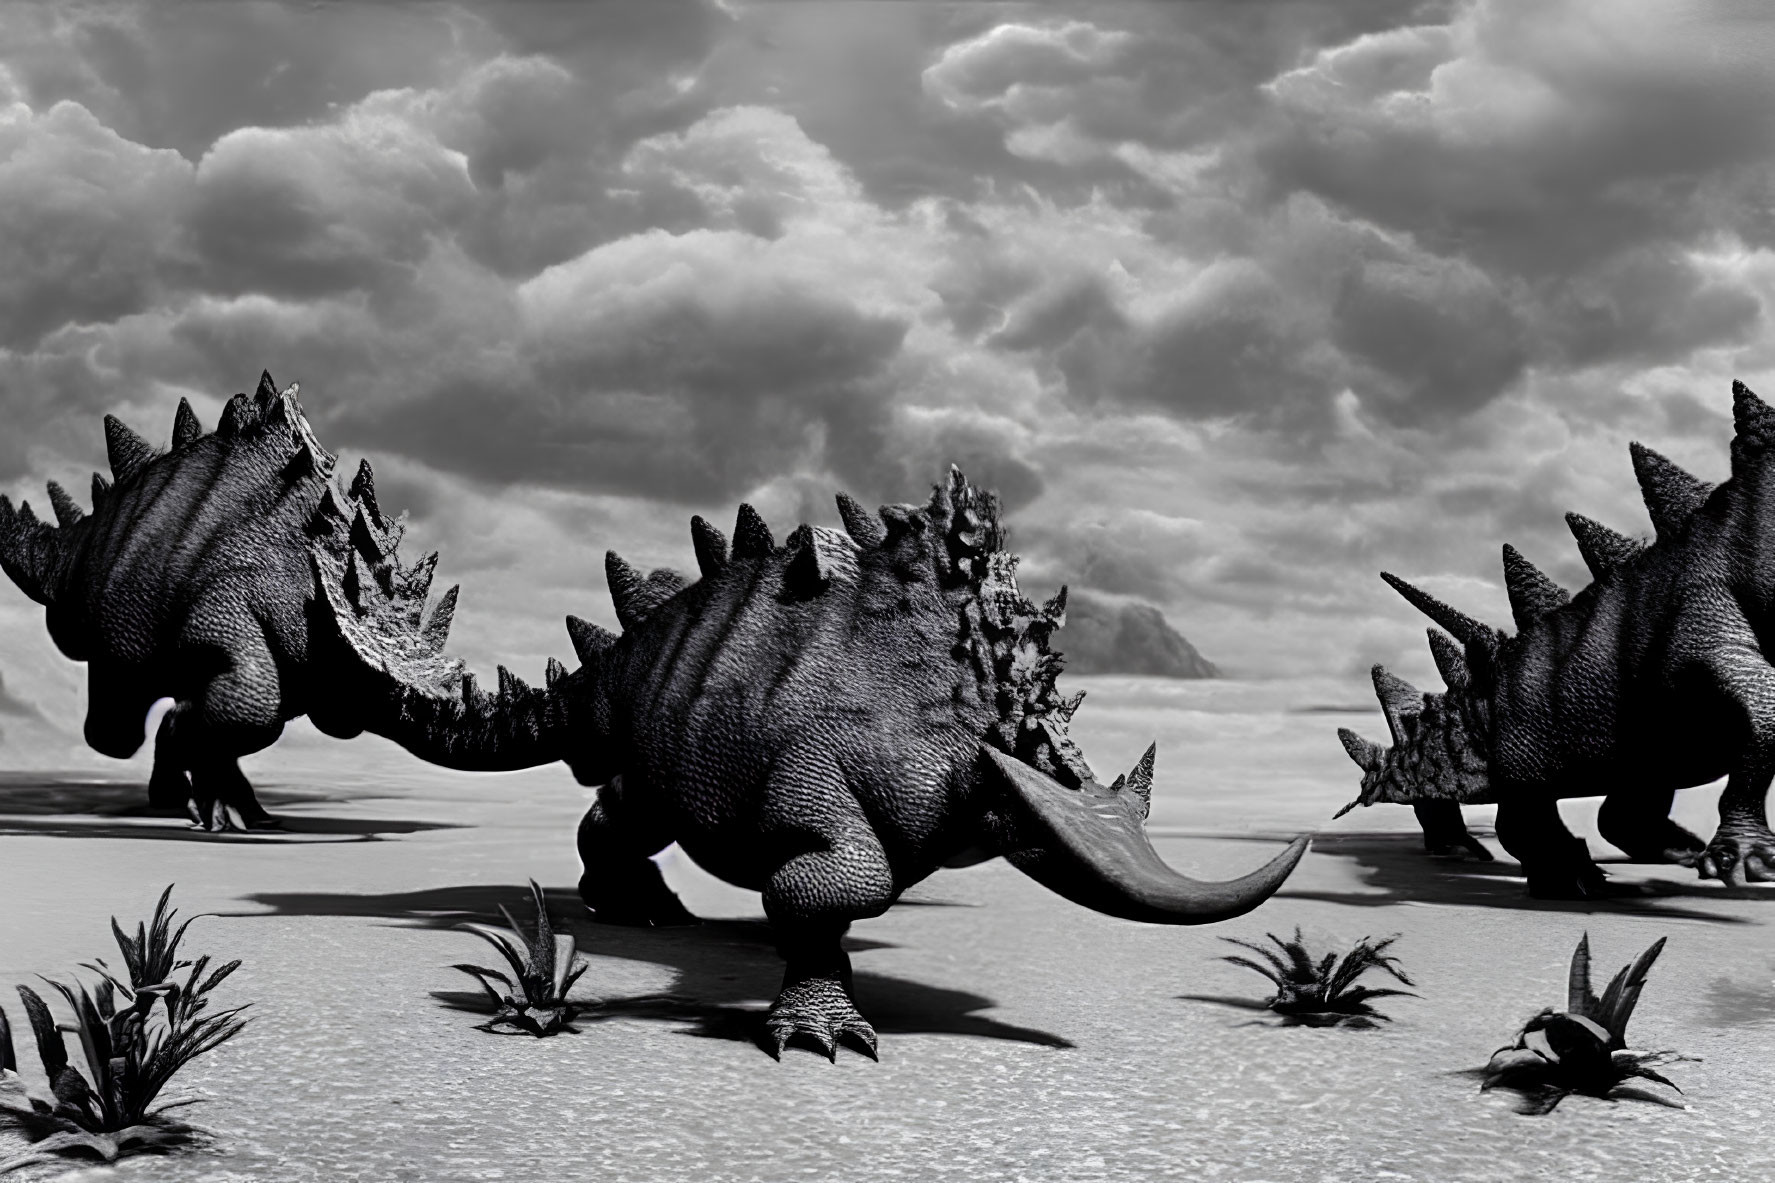 Three spiky dinosaurs in barren landscape with dramatic clouds